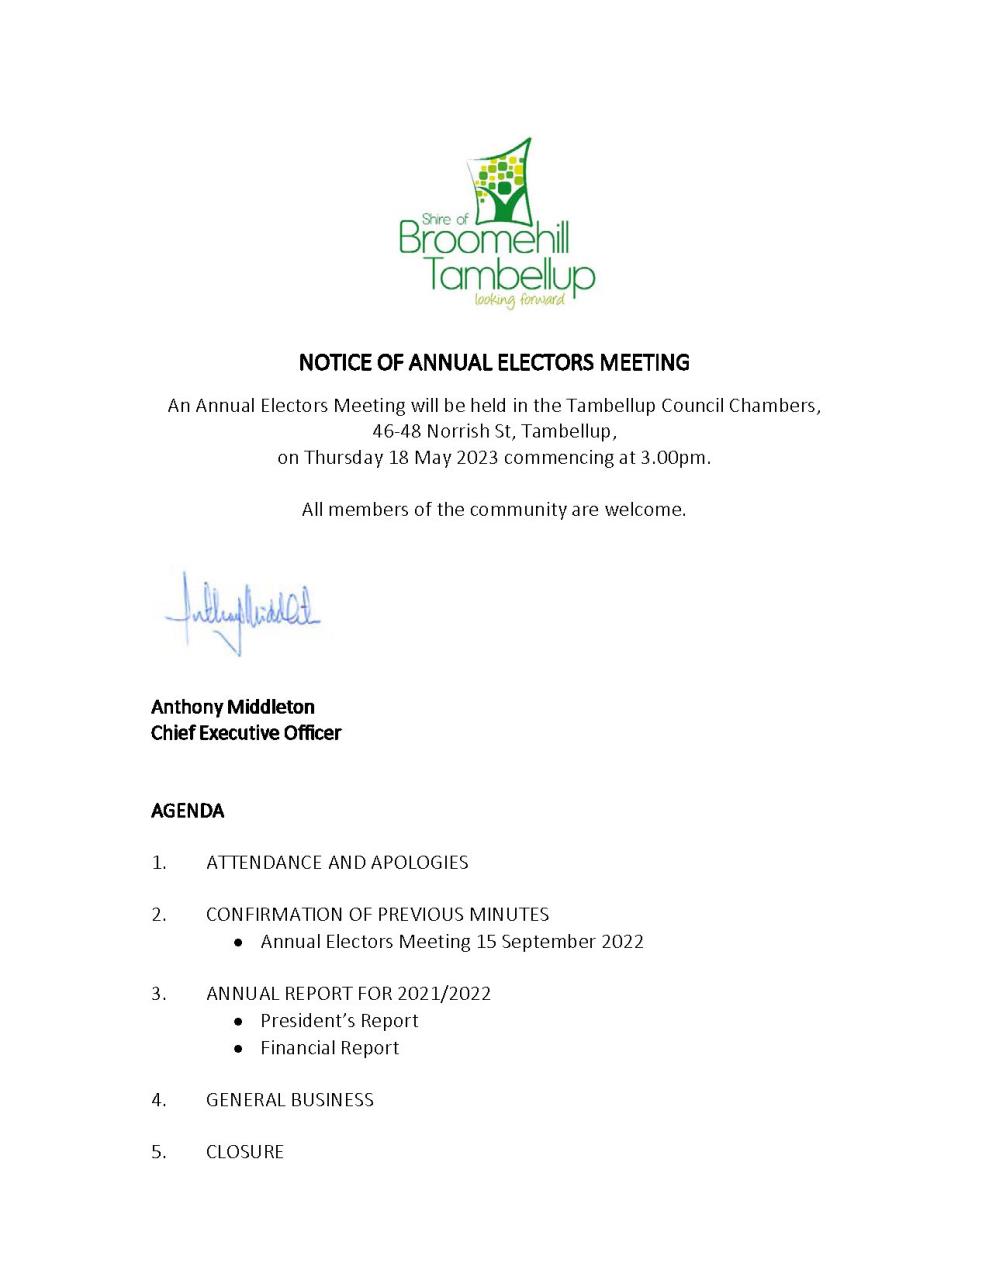 Notice of meeting and agenda